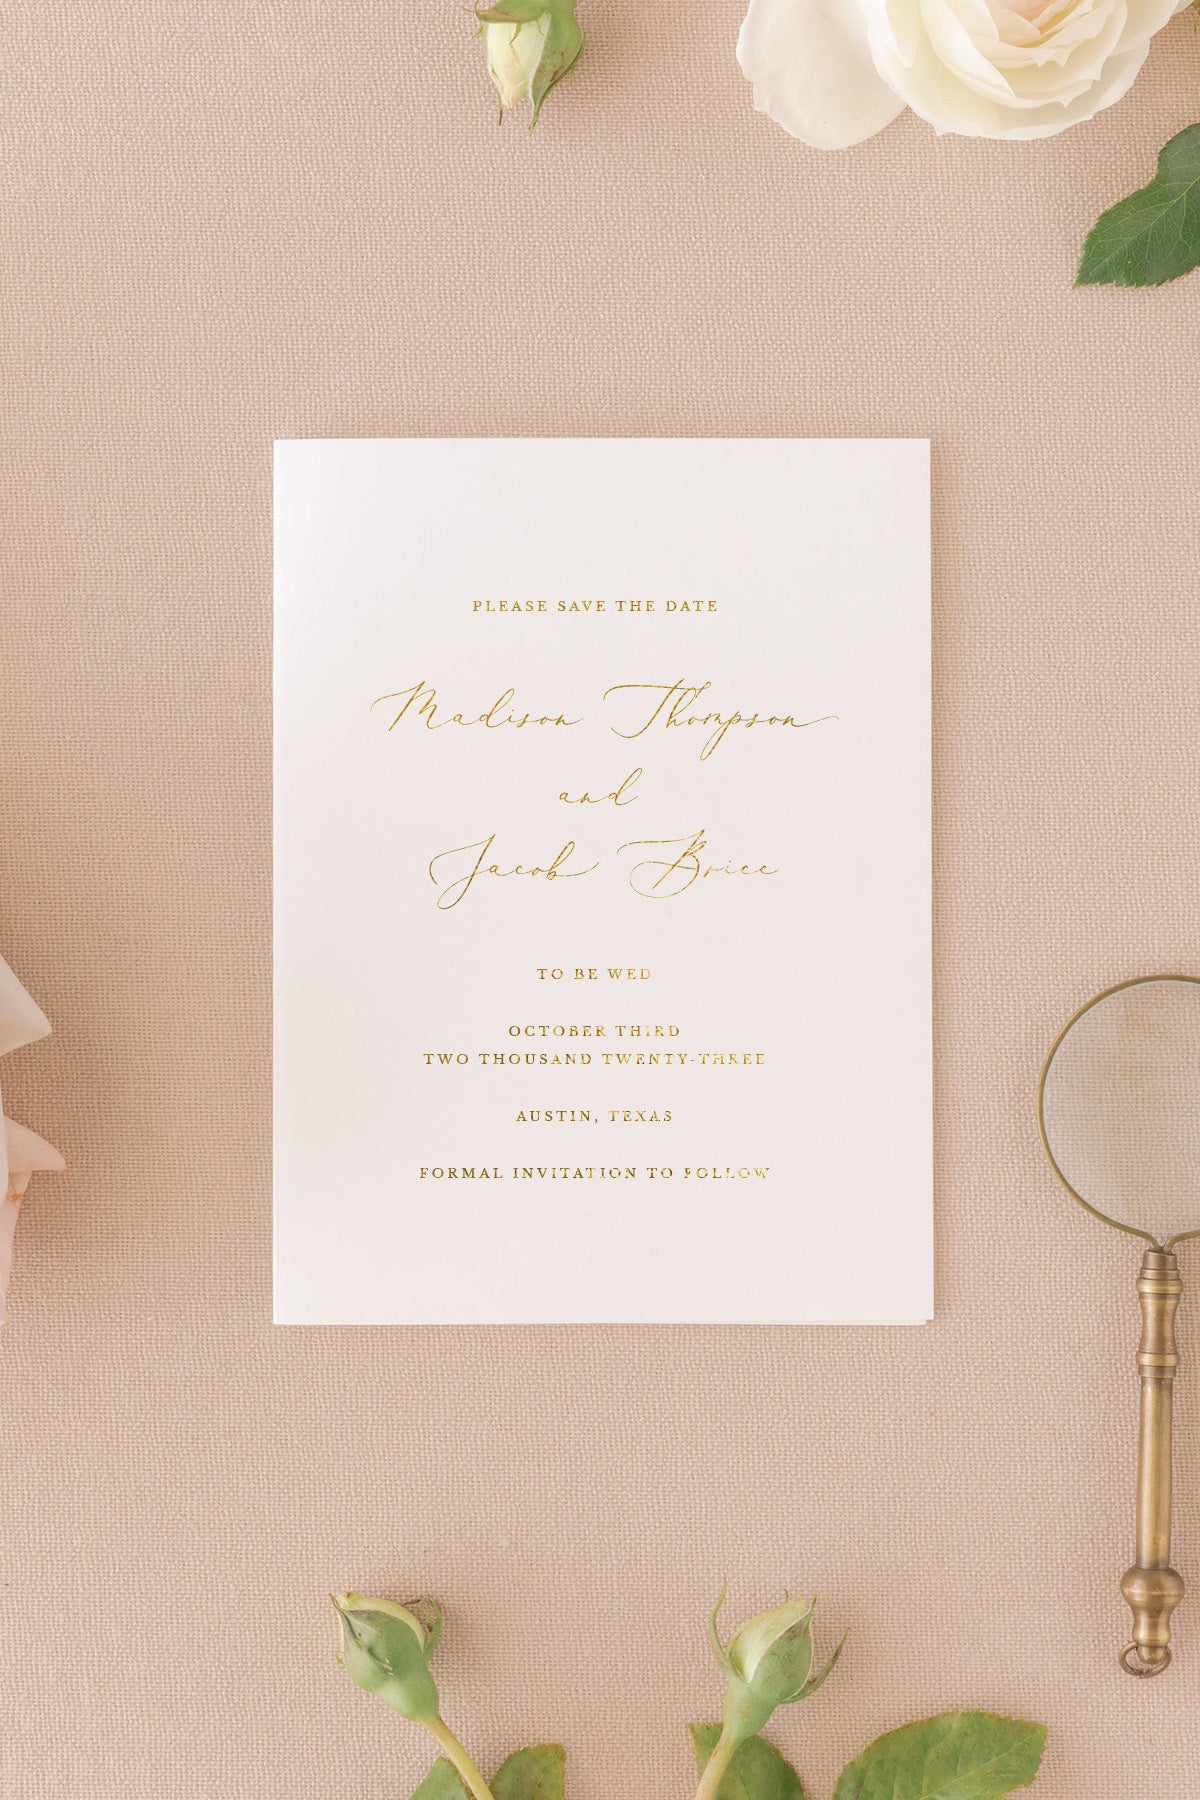 Save the Date Wedding Card Ivory Cardstock Rose Gold, Silver Foil